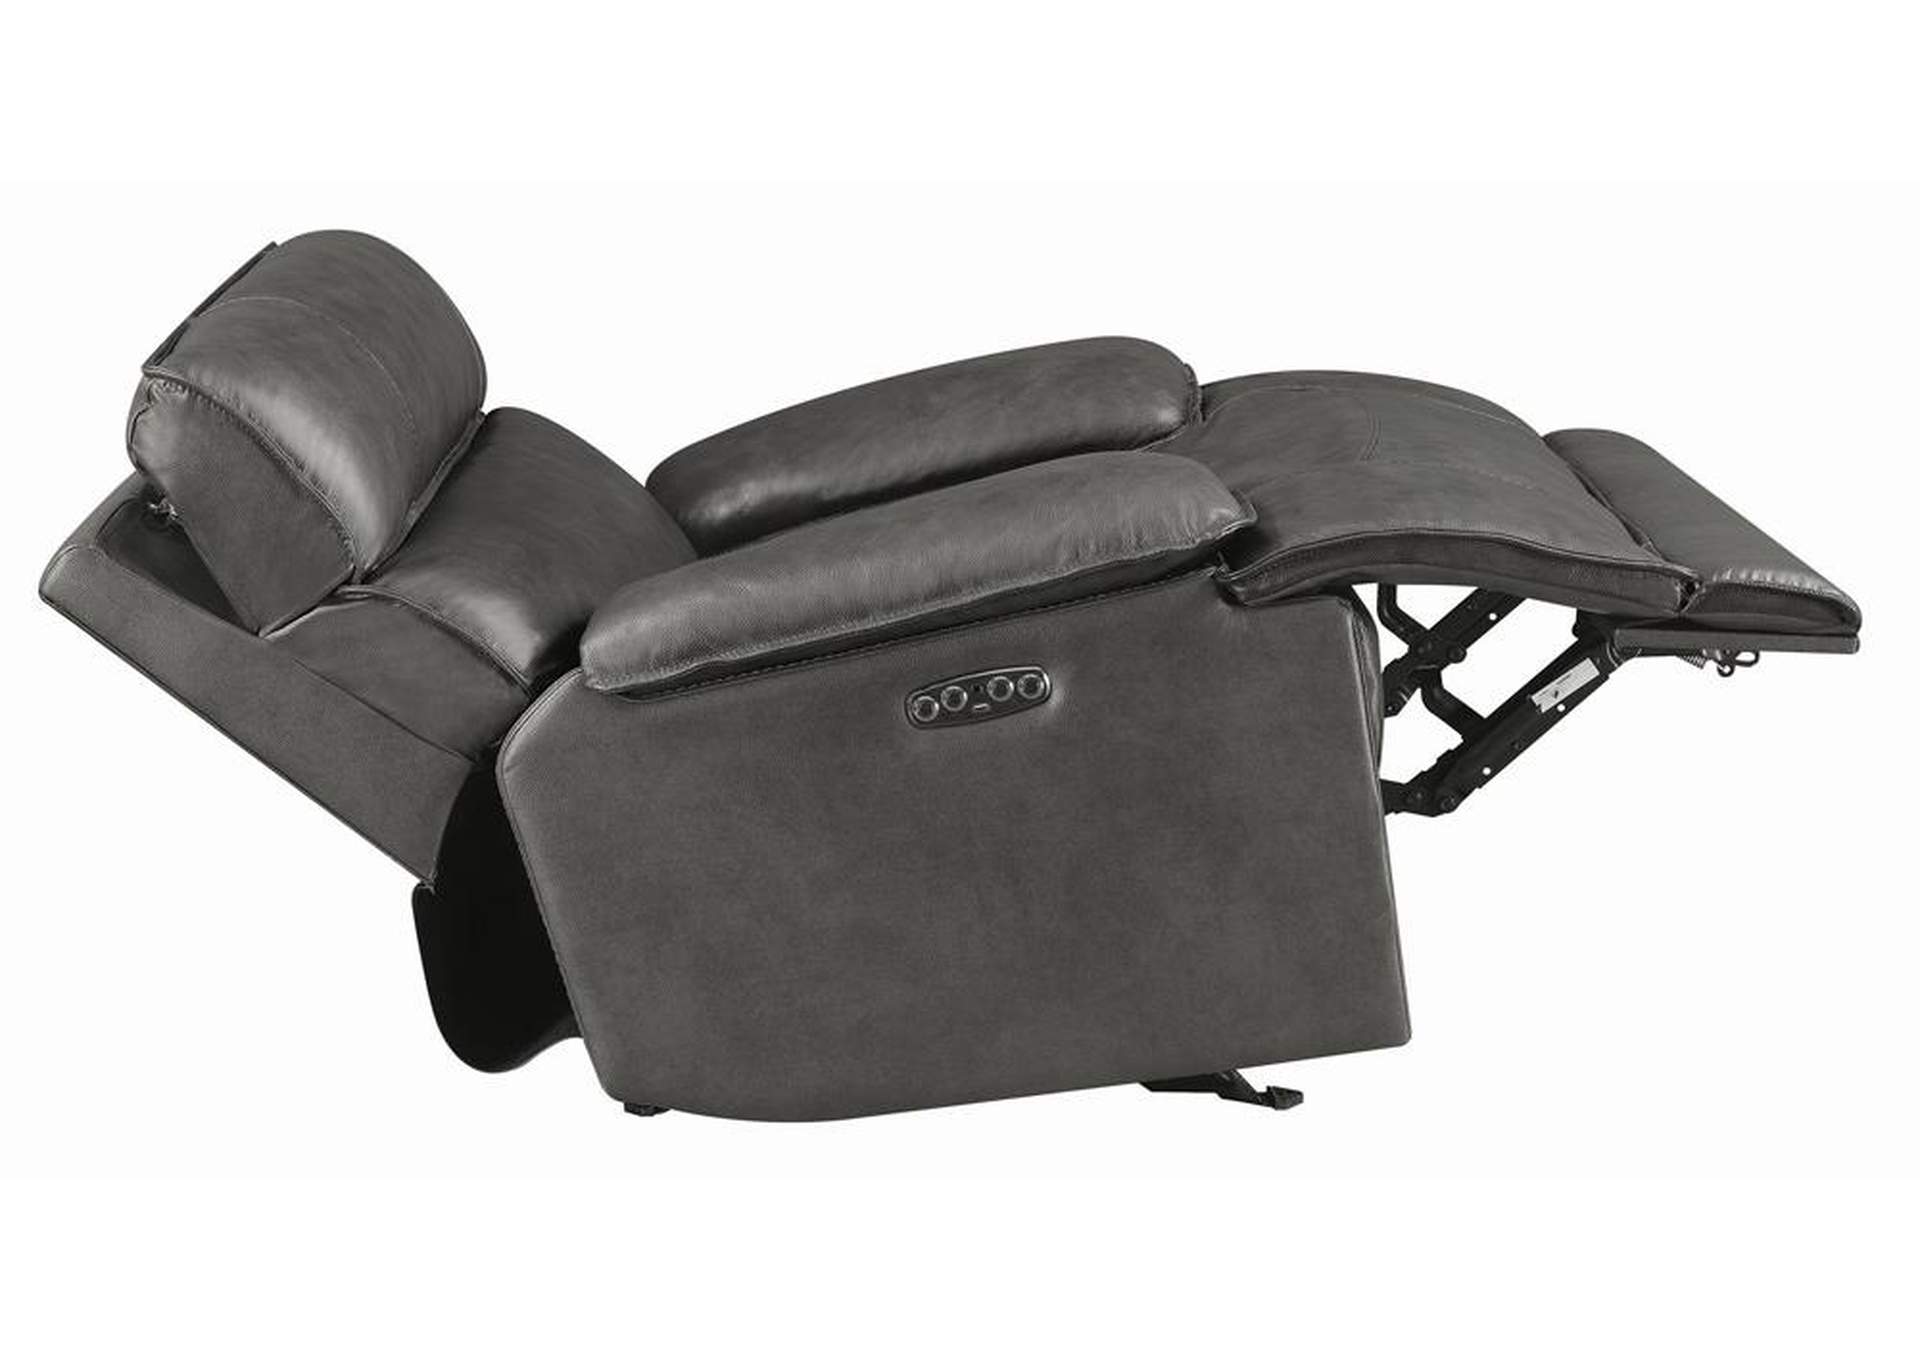 Standford Casual Charcoal Power Glider Recliner,Coaster Furniture